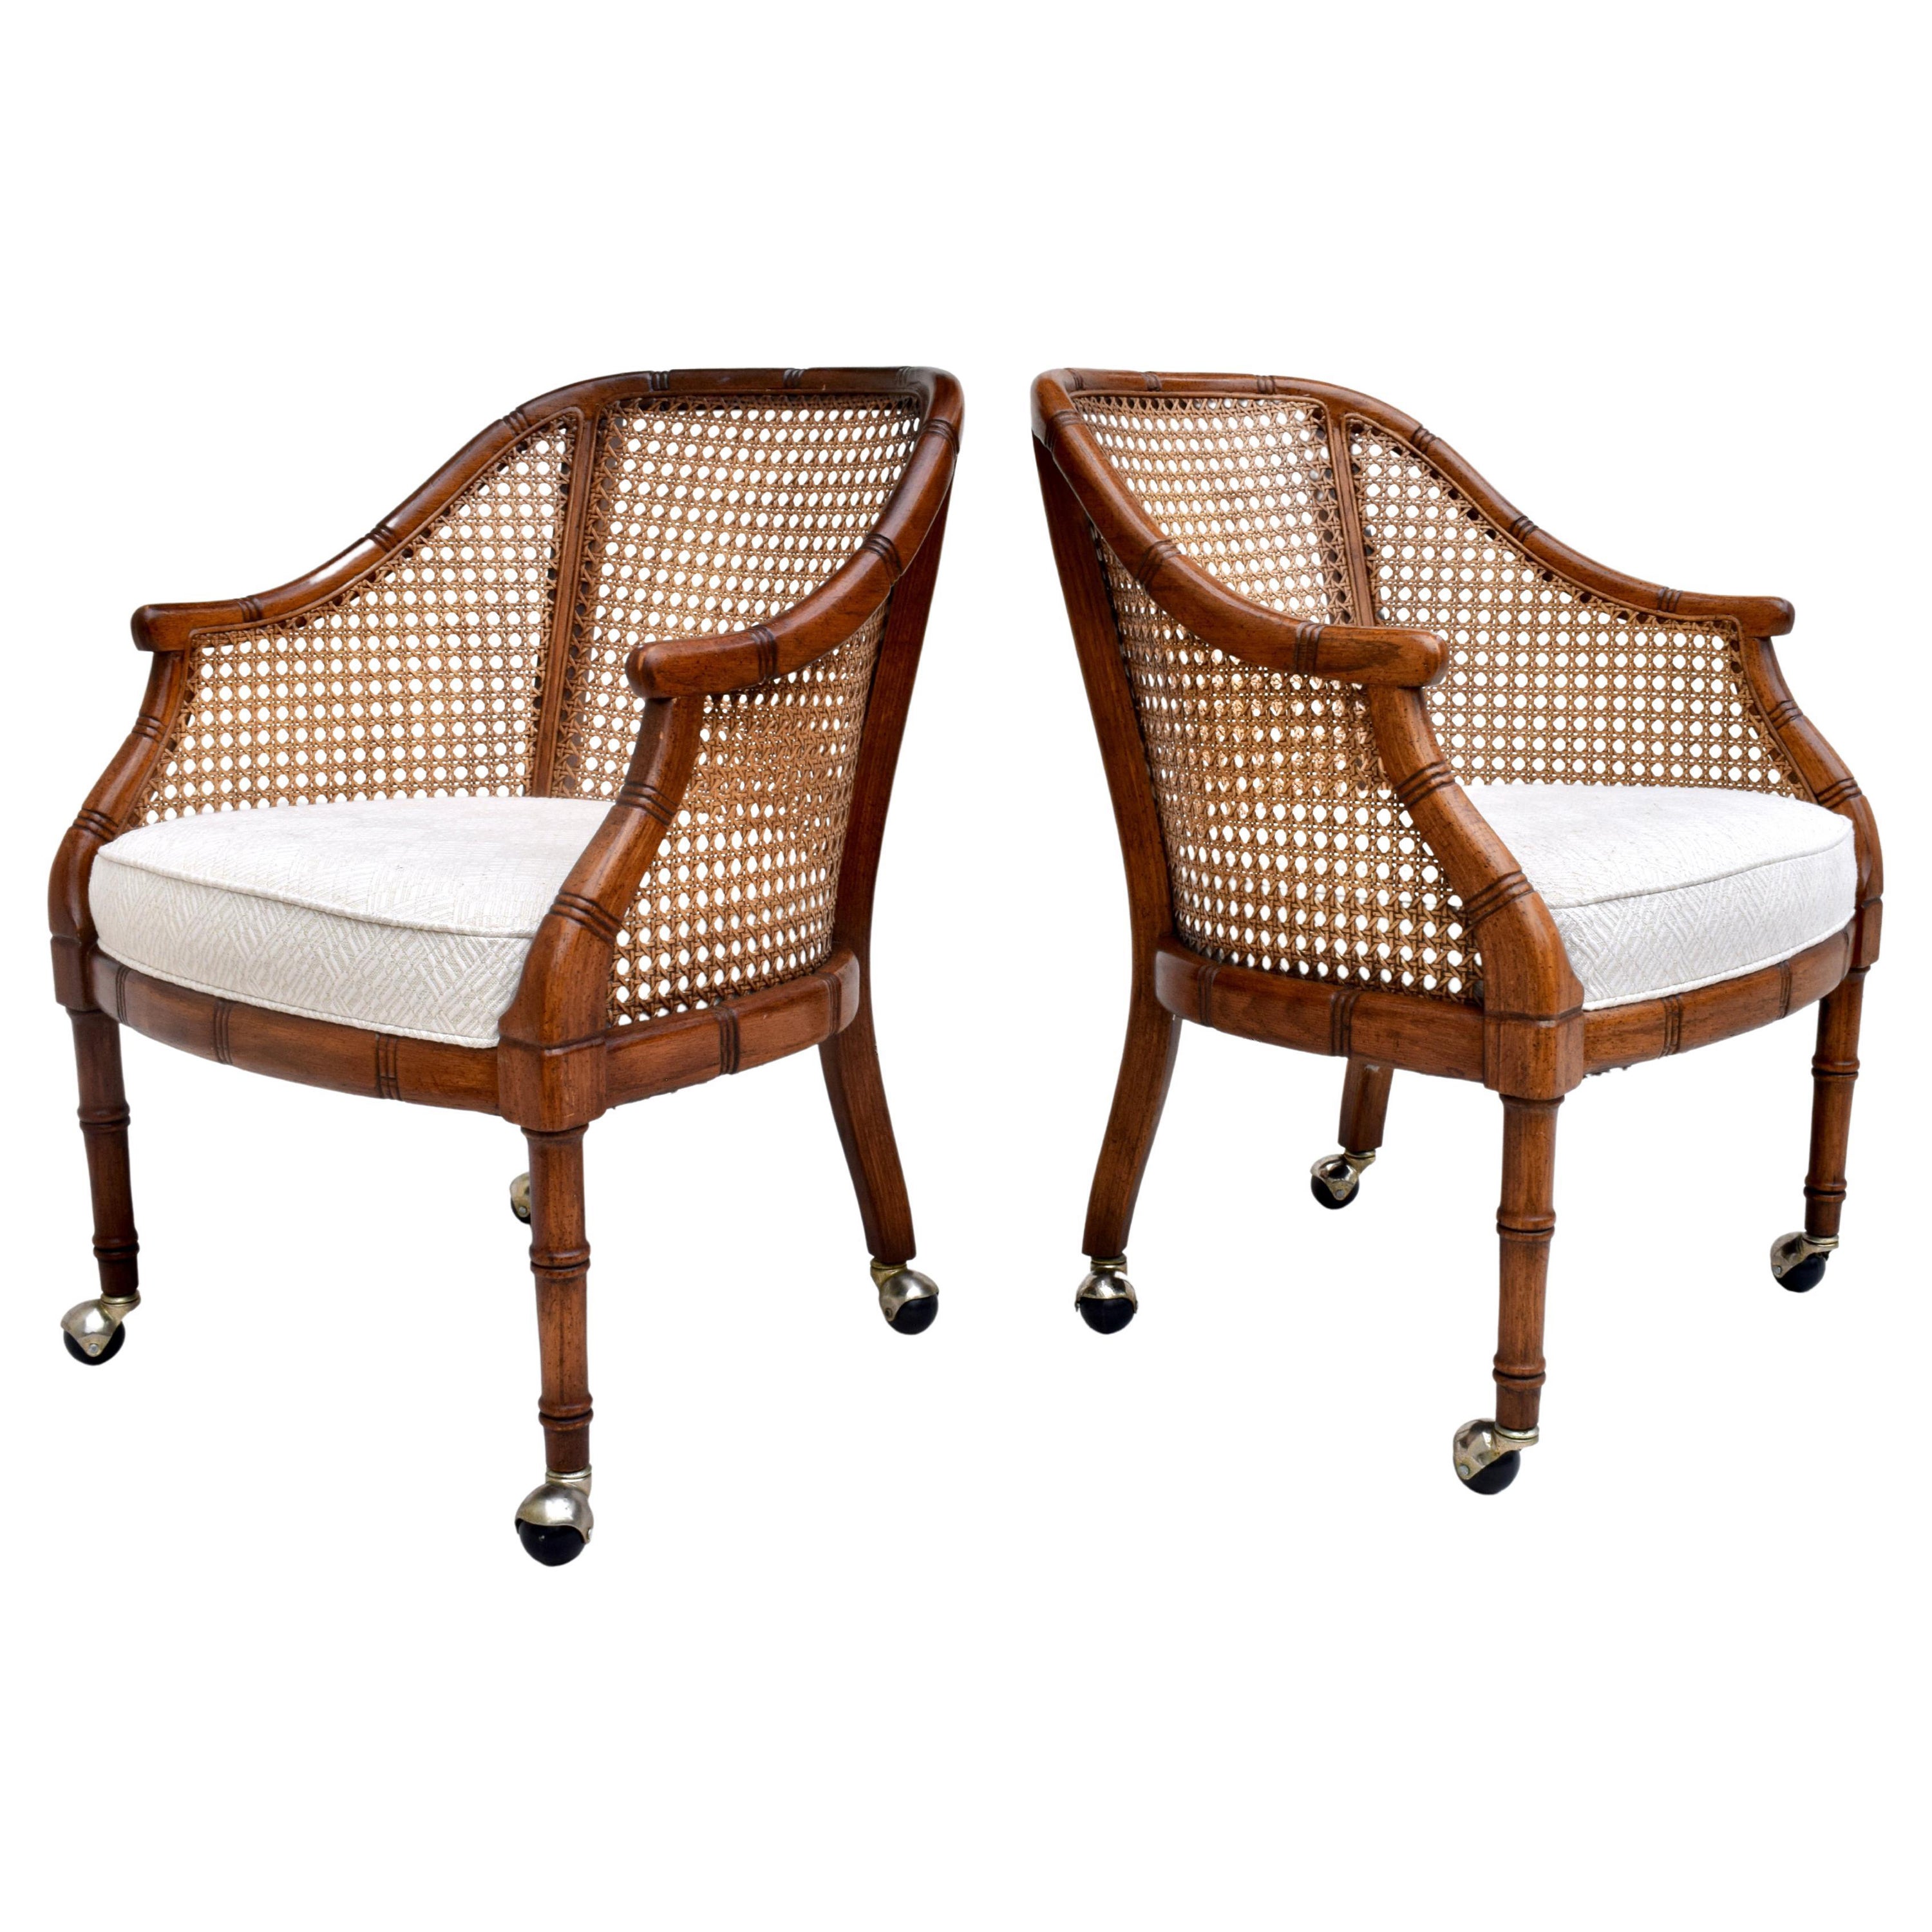 Pair of Caned Barrel Chairs on Casters